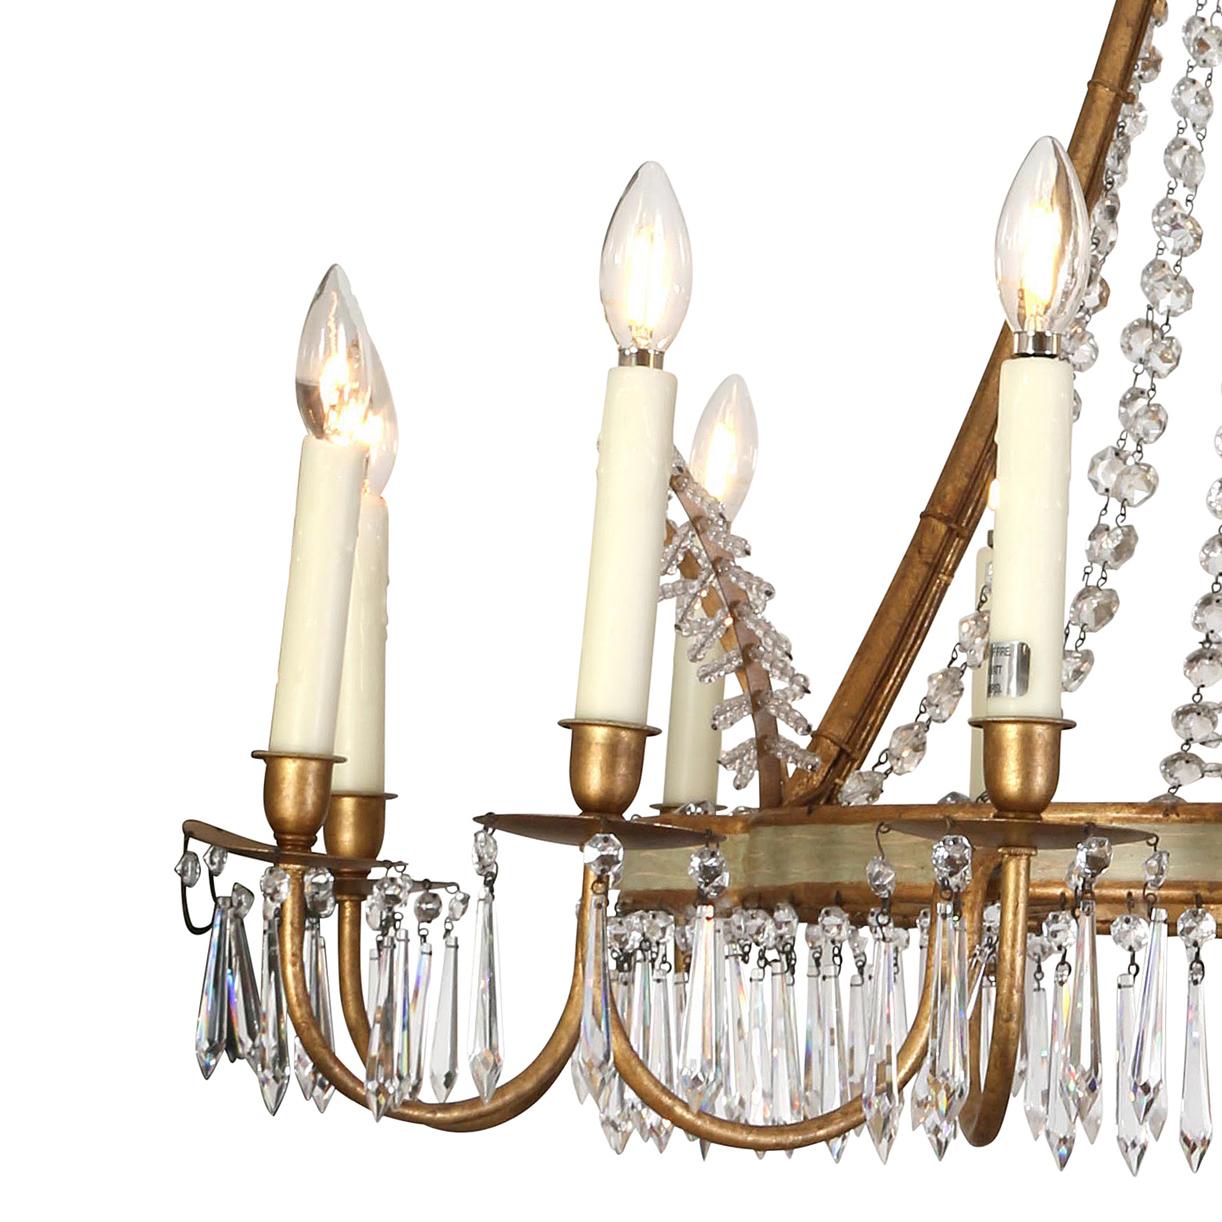 A fantastic twelve-arm chandelier with a painted and parcel gilt curved center ring, decorated with crystal prisms hanging from the ring and strings of glass beads suspended from the painted 